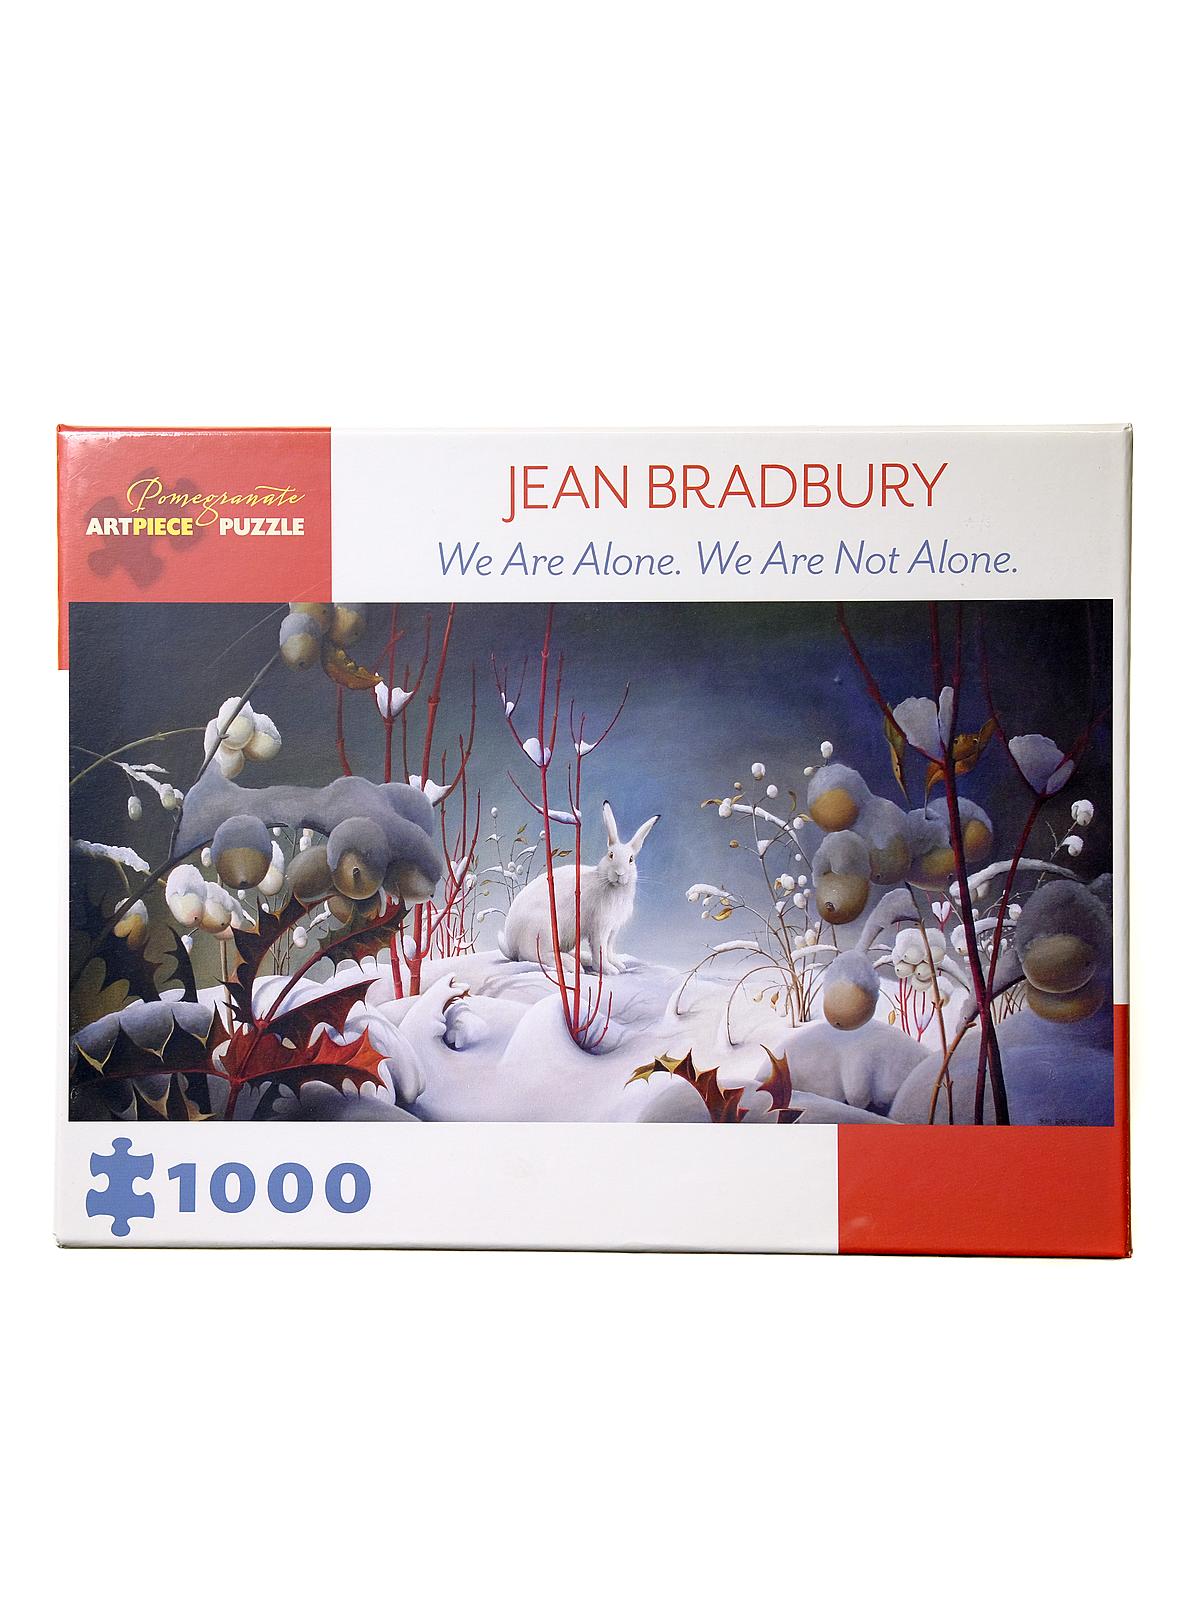 1000-piece Jigsaw Puzzles Jean Bradbury: We Are Alone, We Are Not Alone